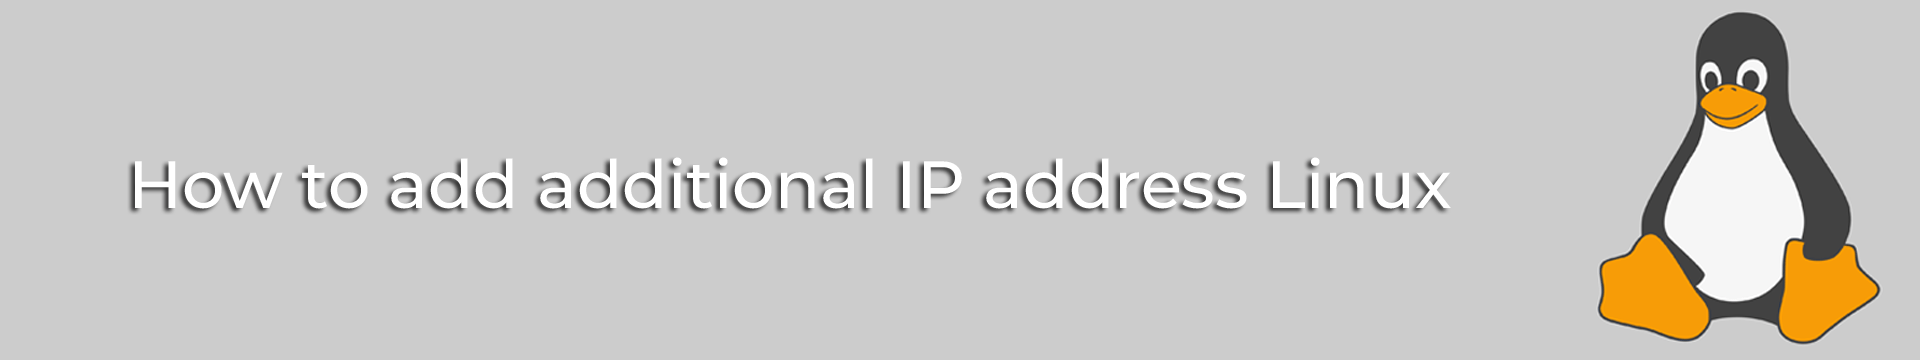 How to add additional IP address Linux